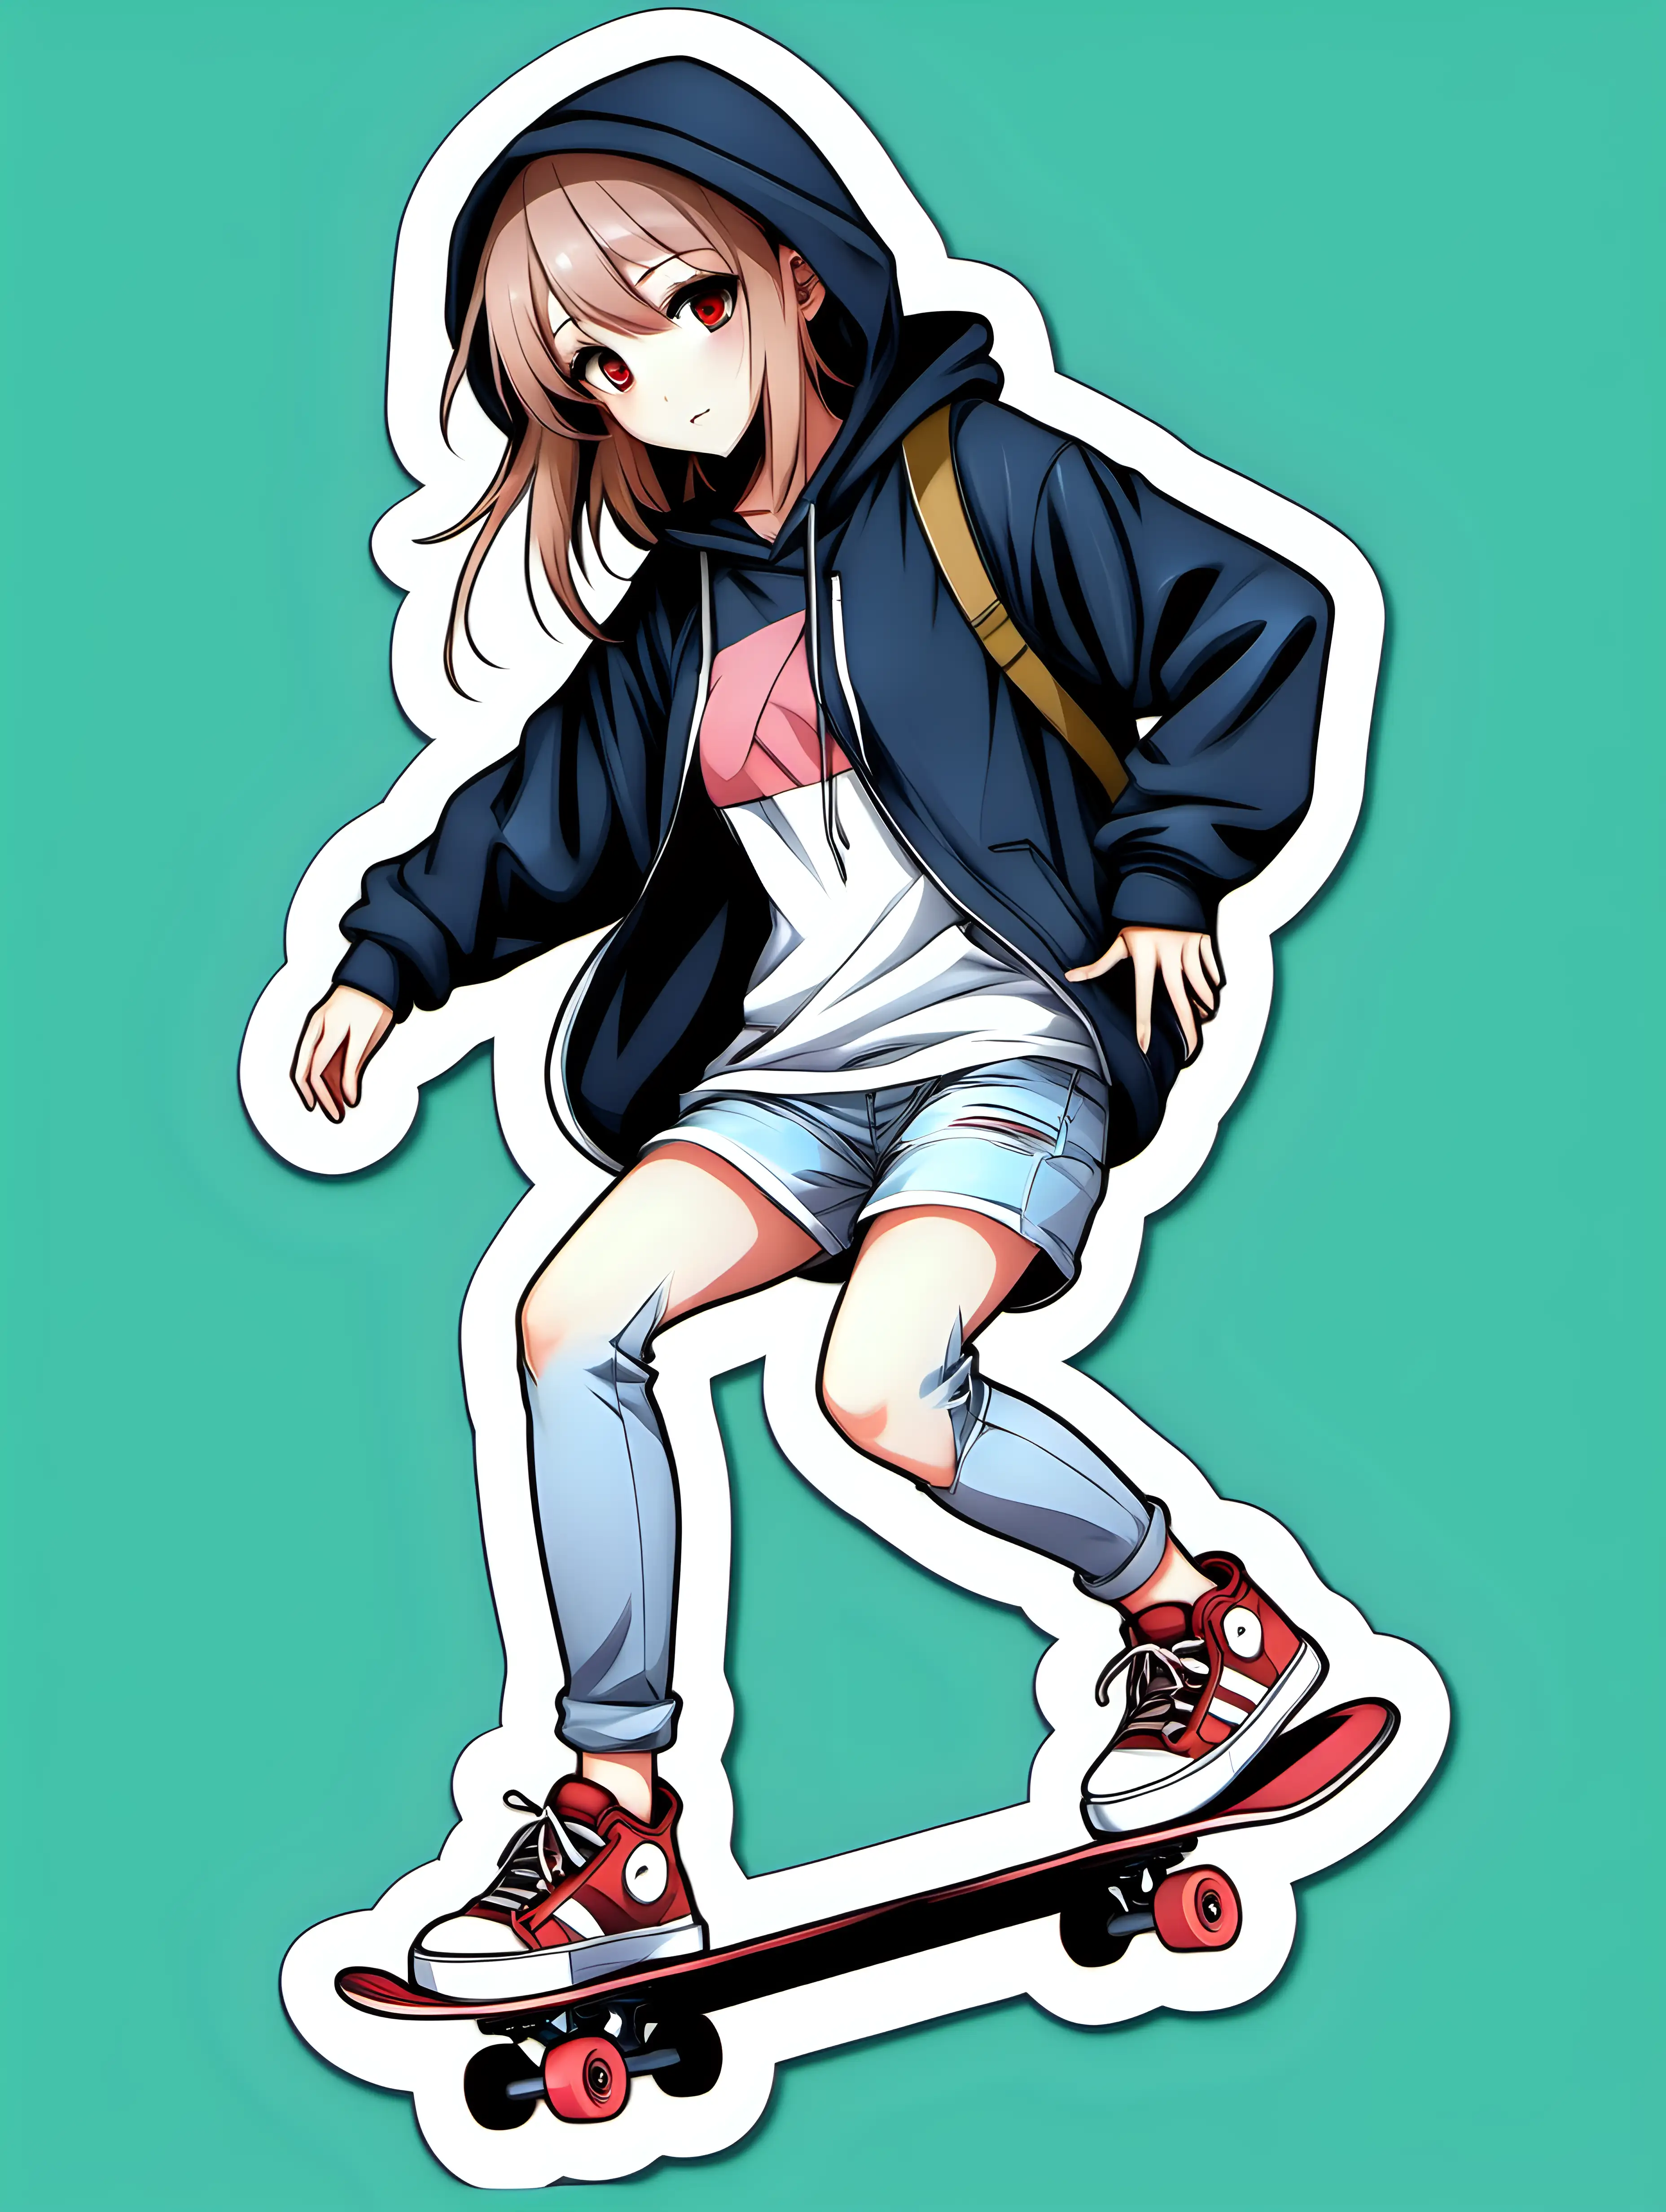 Anime Girl Skateboarding Sticker Cool Hoodie and Sneakers Style